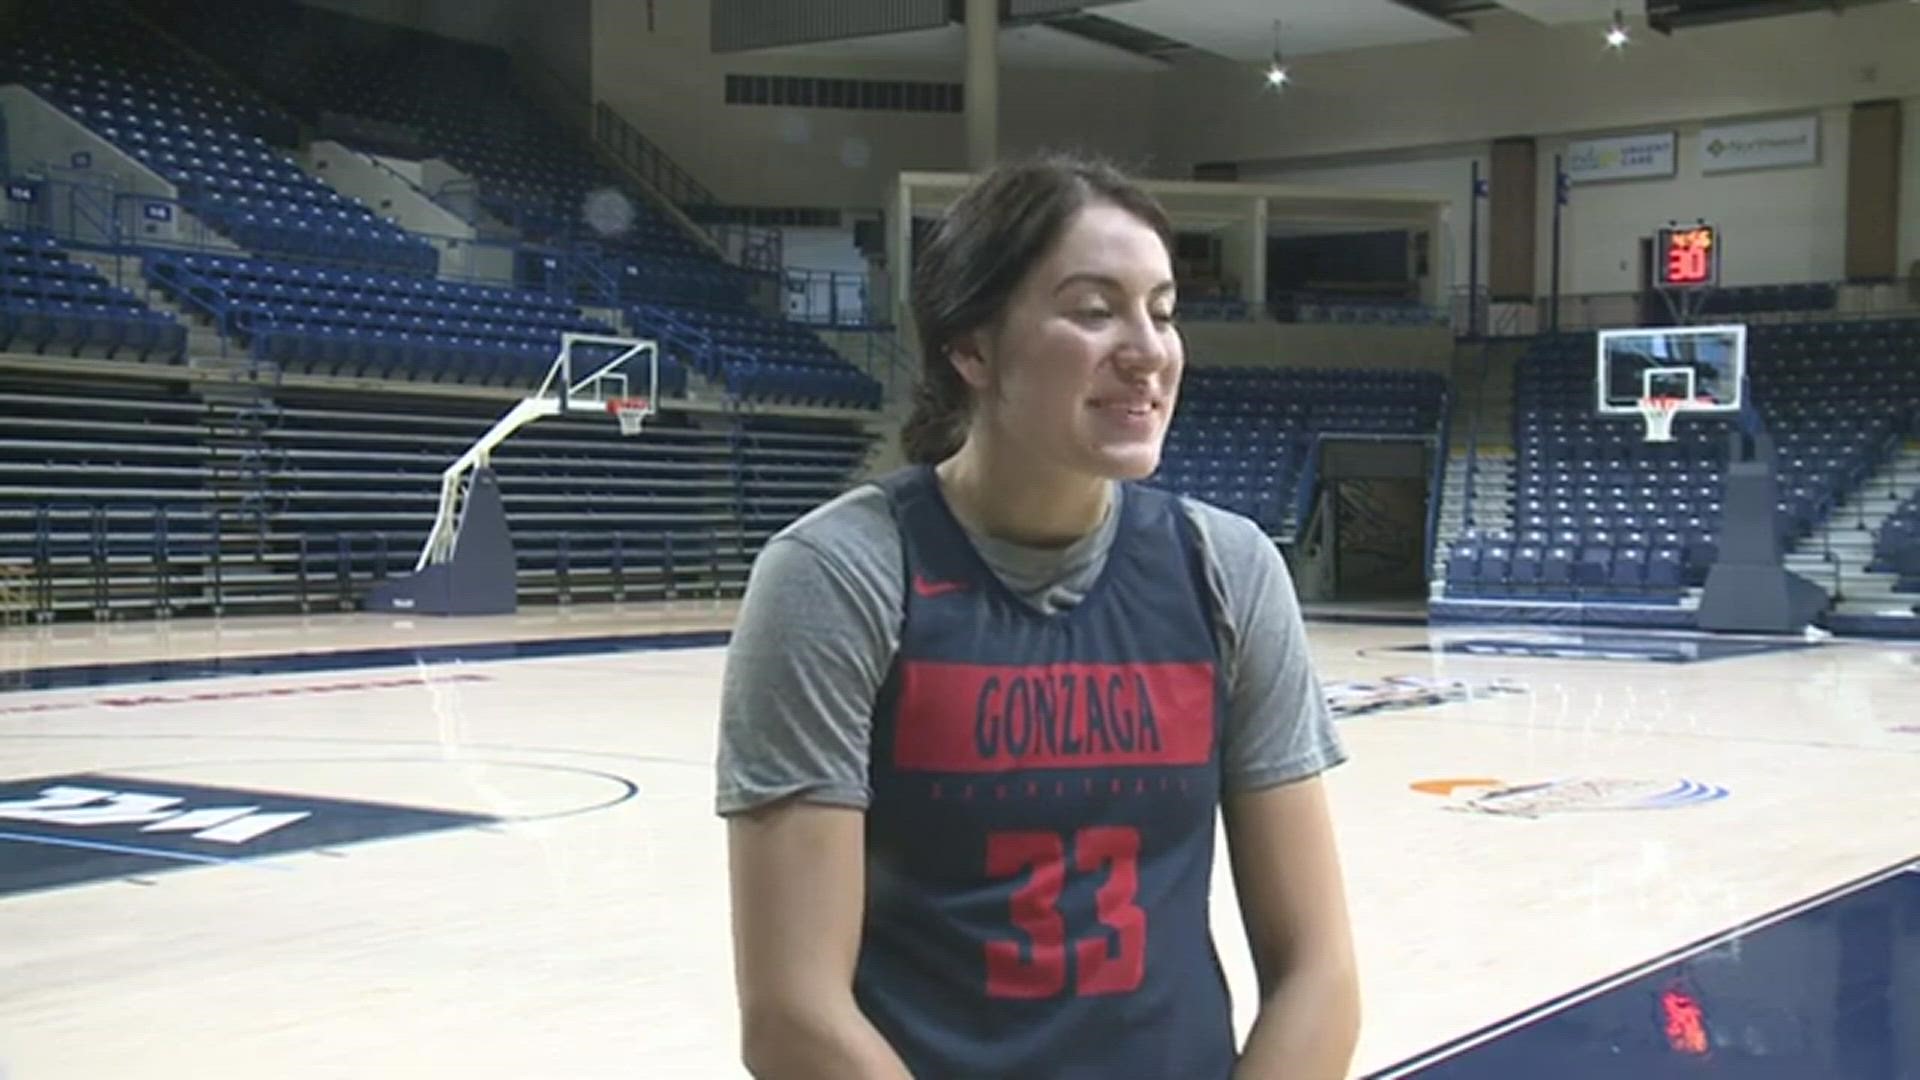 Gonzaga's Melody Kempton, Yvonne Ejim and Kayleigh Truong: WCC Awards press conference | RAW